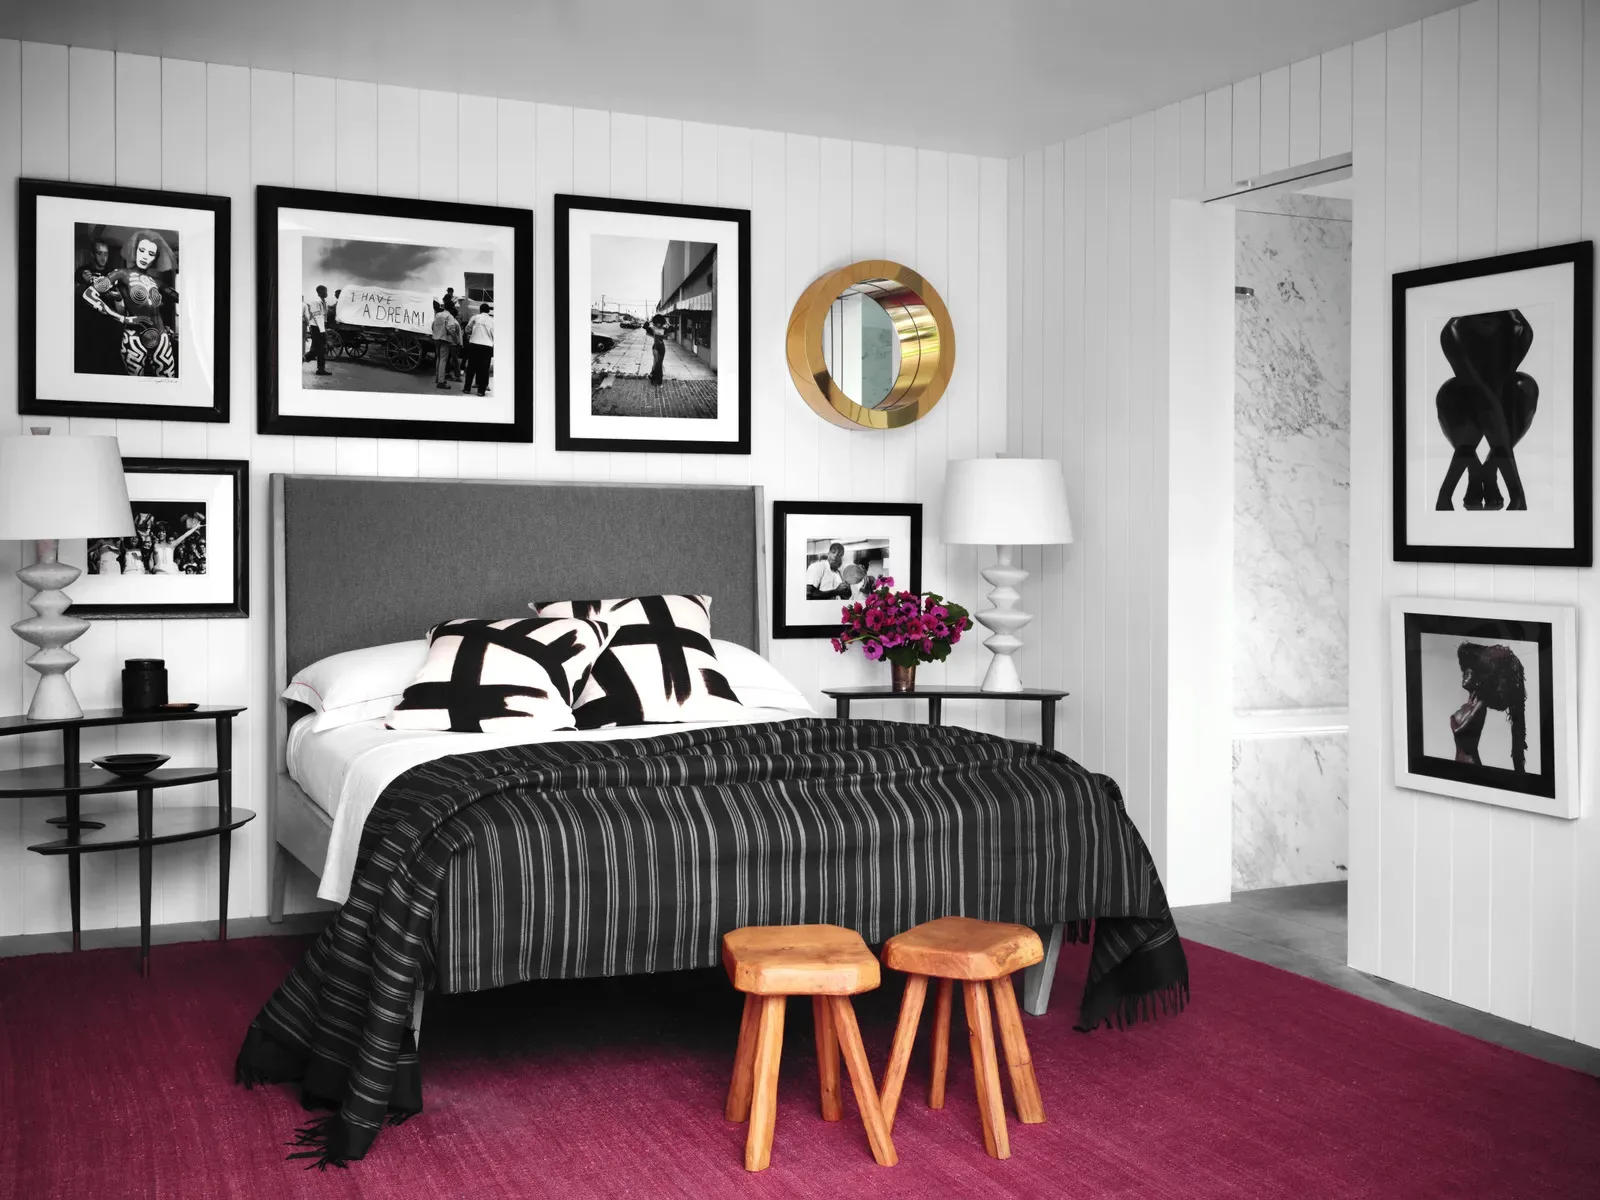 playful children's rooms in tones of black white and purple